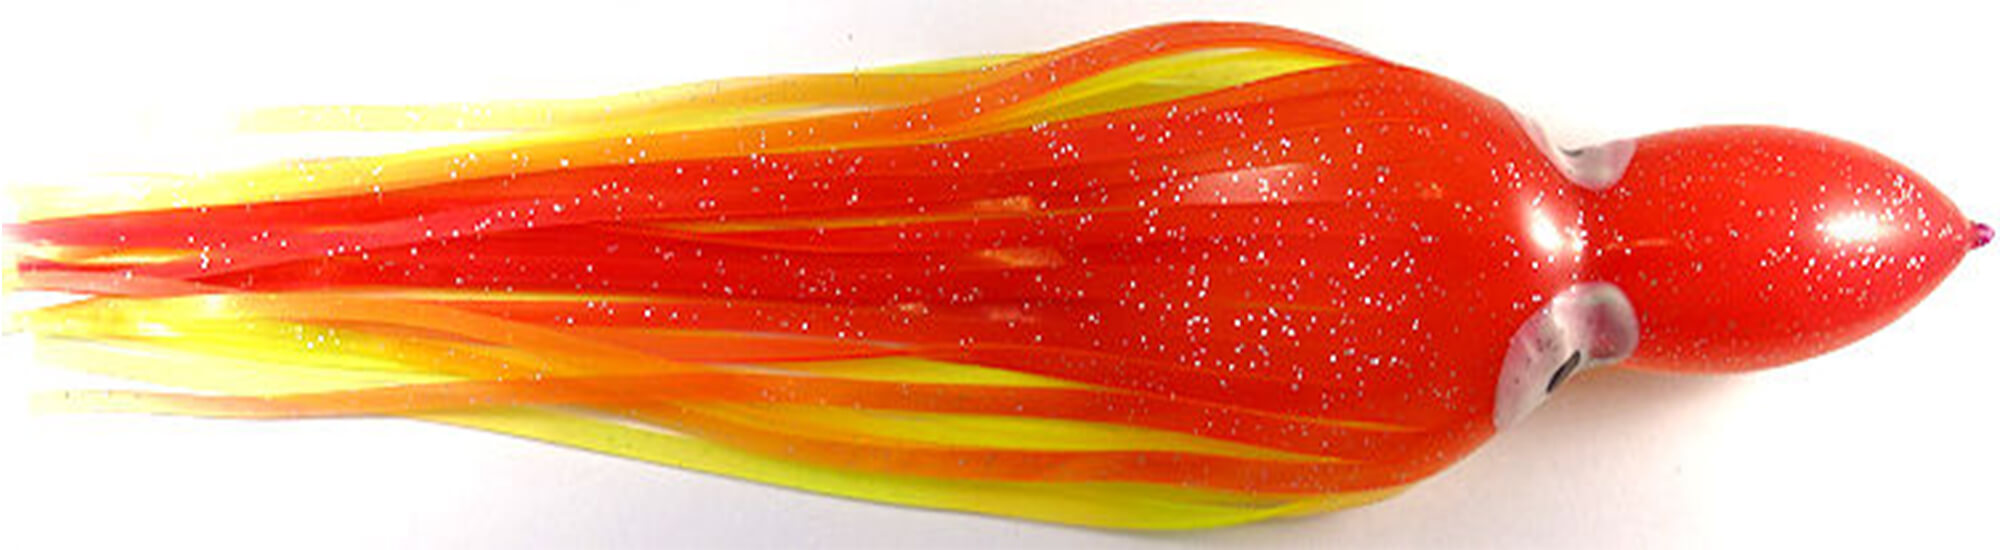 Yo-Zuri Octopus Trolling Skirts - Skirts for Marlin Lures